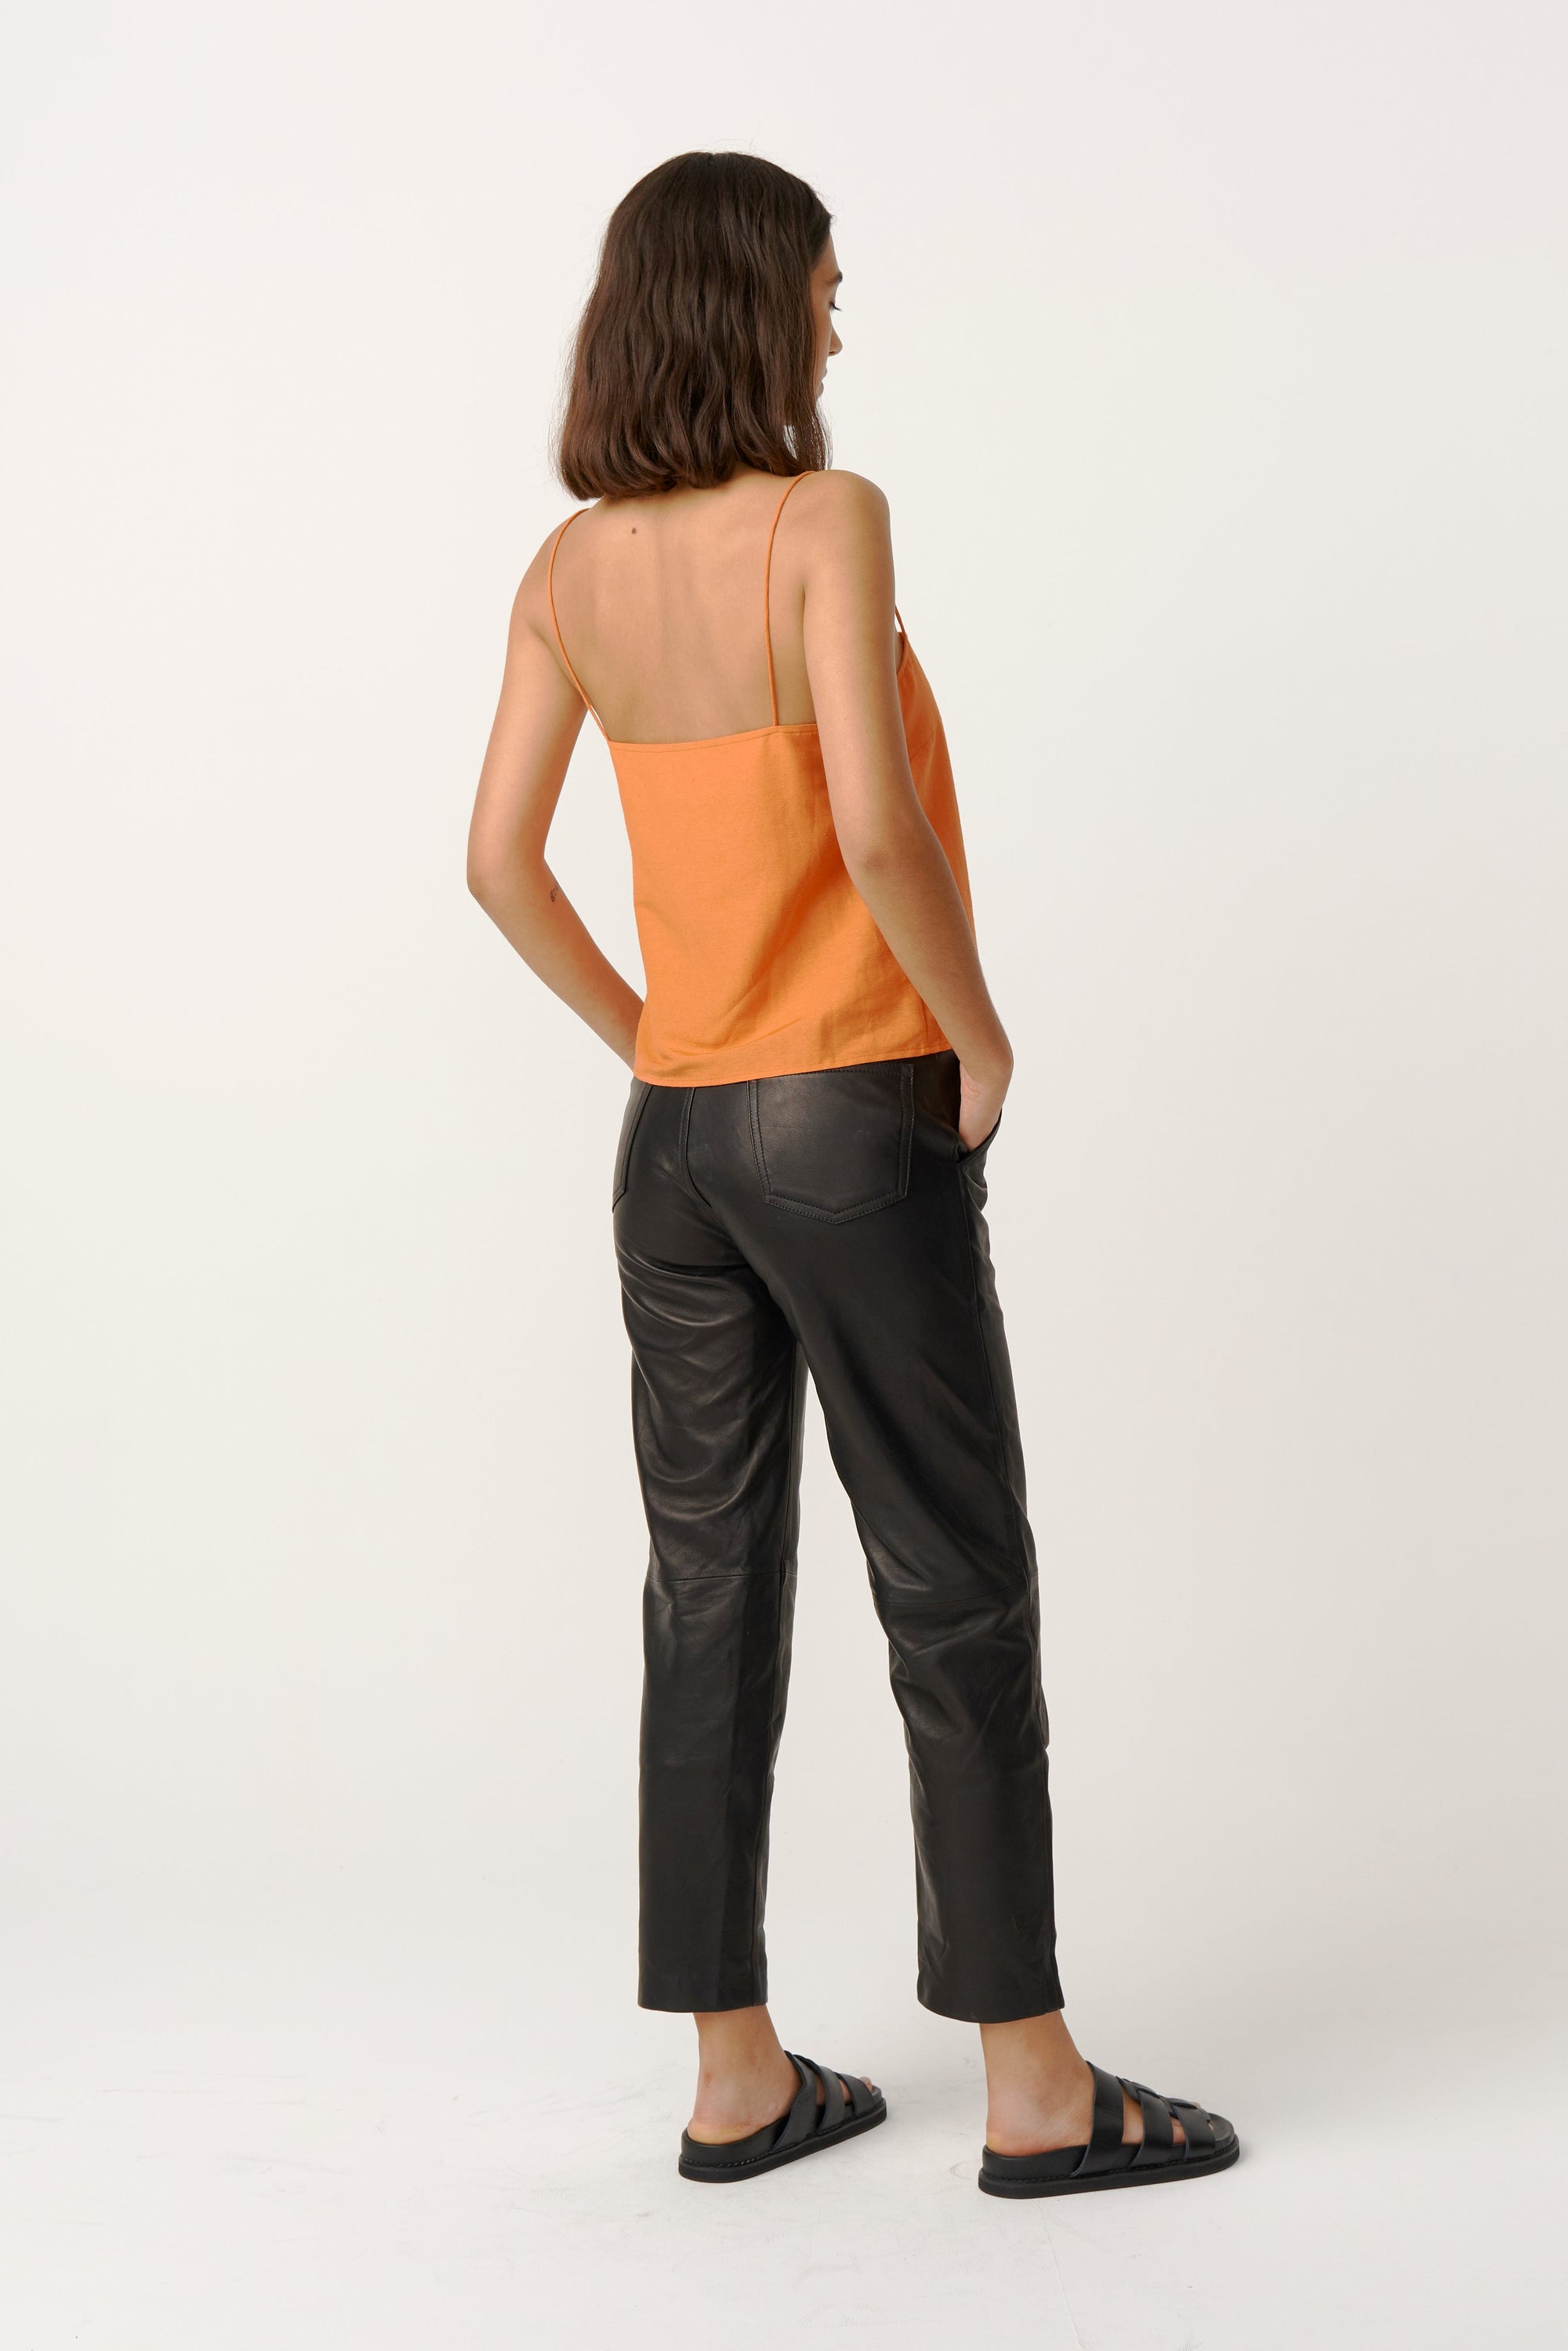 The Adel Cami | Tangerine Tops | The Bali Tailor